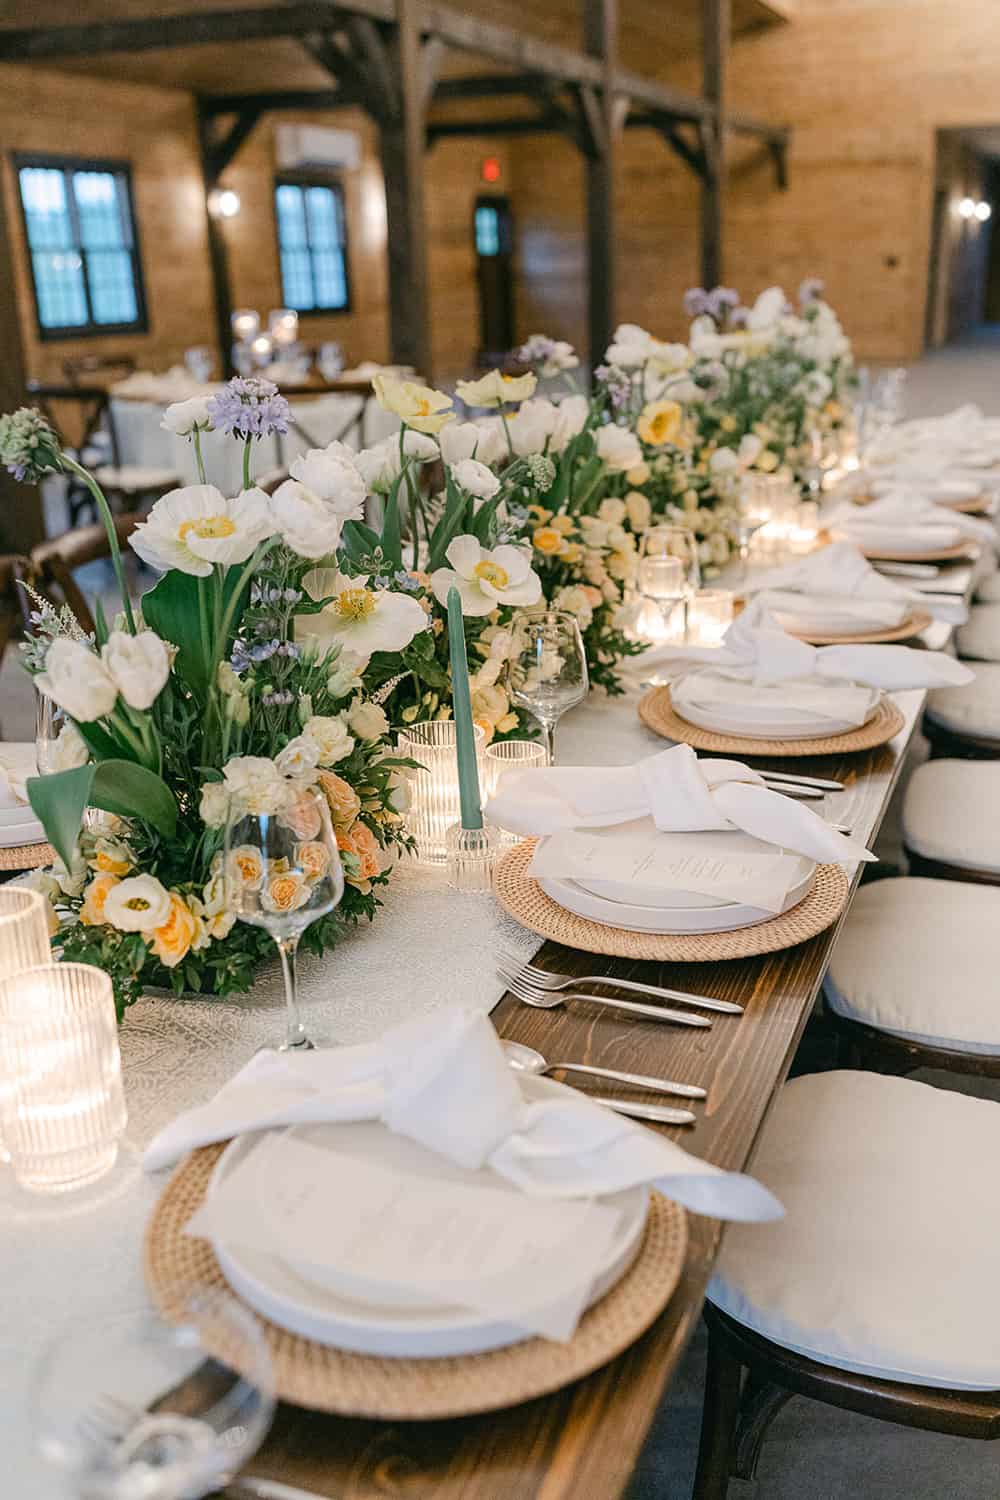 Elegant wedding reception table setup in a rustic venue with floral arrangements, candles, and dinnerware.